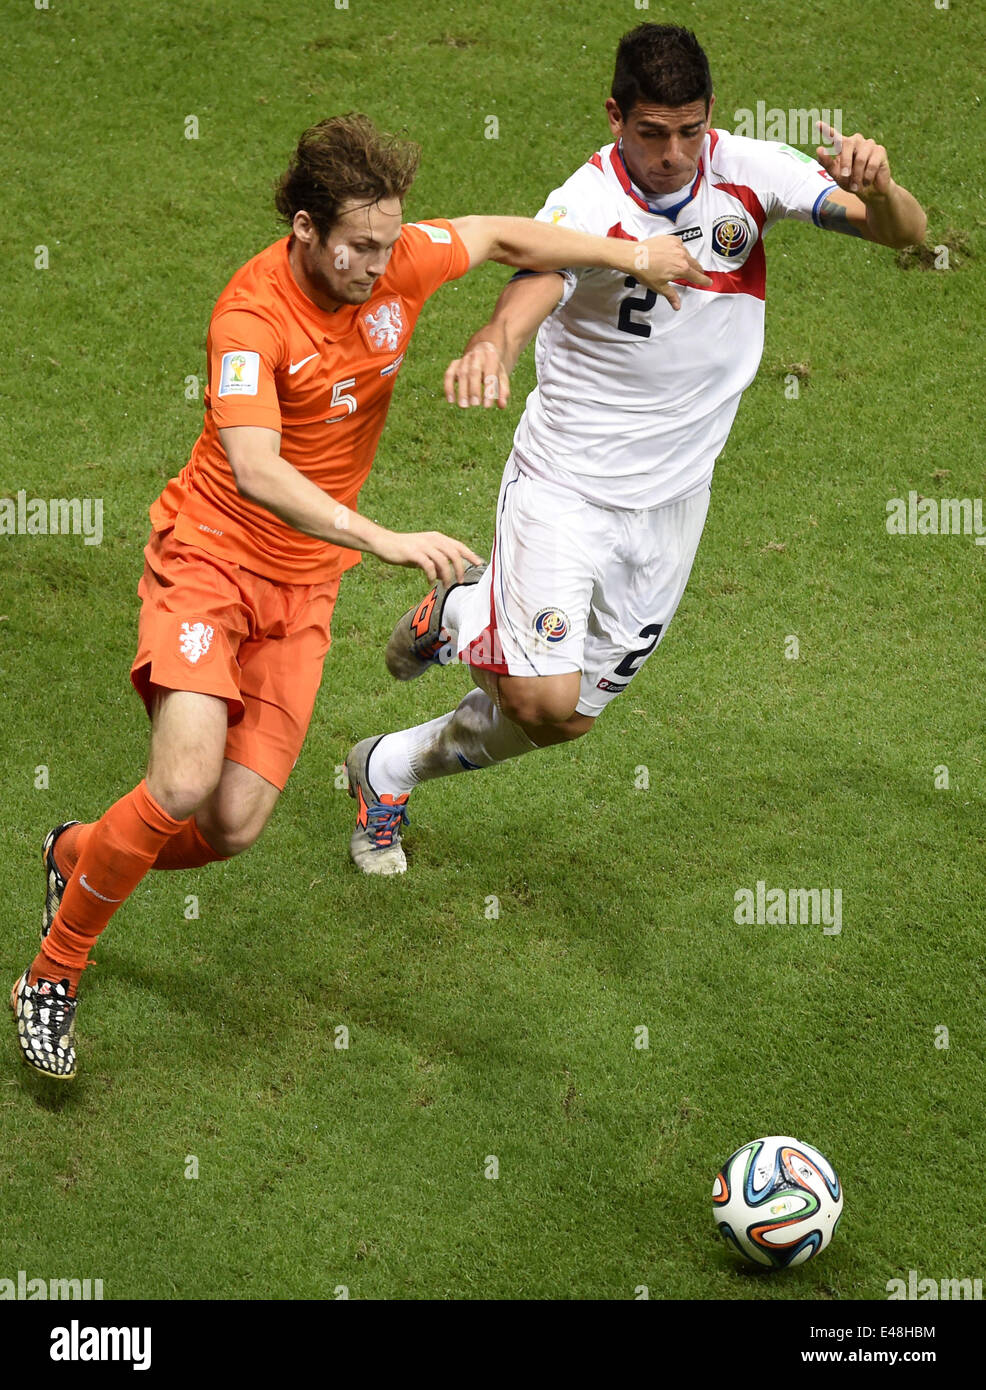 Salvador, Brazil. 5th July, 2014. Netherlands' Daley Blind vies with Costa Rica's Johnny Acosta during a quarter-finals match between Netherlands and Costa Rica of 2014 FIFA World Cup at the Arena Fonte Nova Stadium in Salvador, Brazil, on July 5, 2014. Credit:  Yang Lei/Xinhua/Alamy Live News Stock Photo